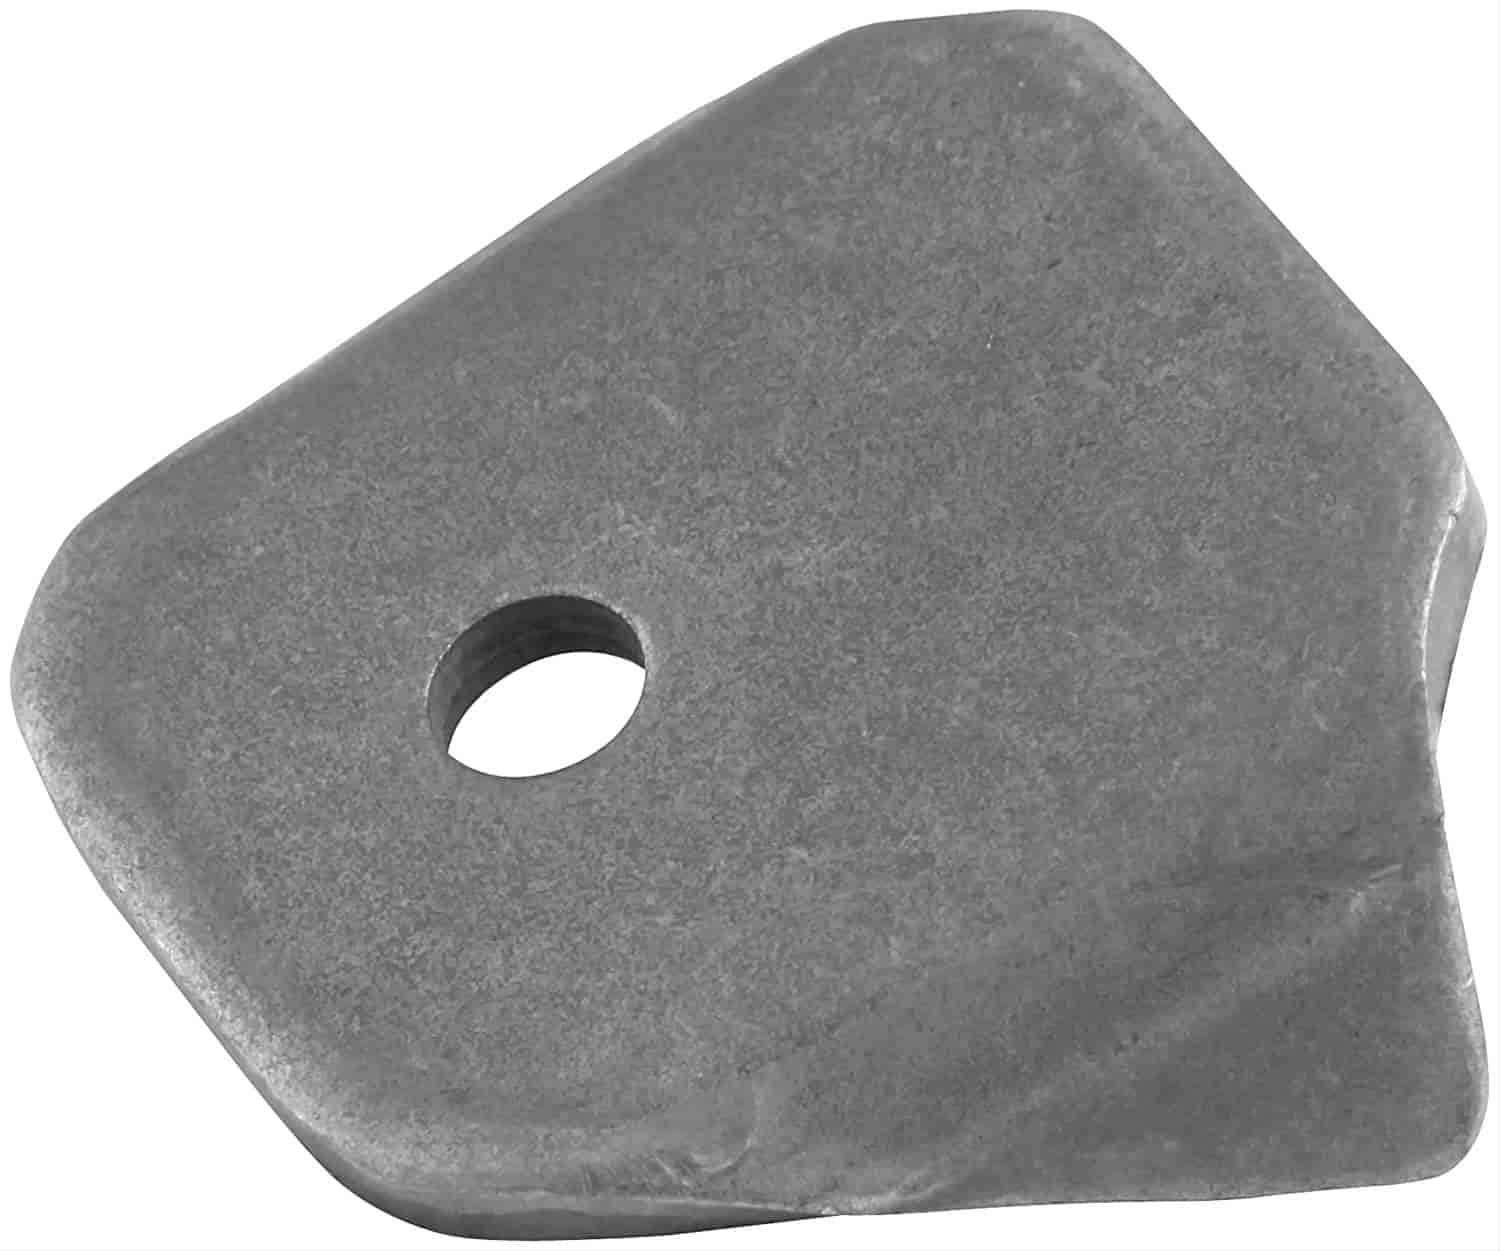 Body Brace Tabs - For Round Tube Thickness: 1/8"